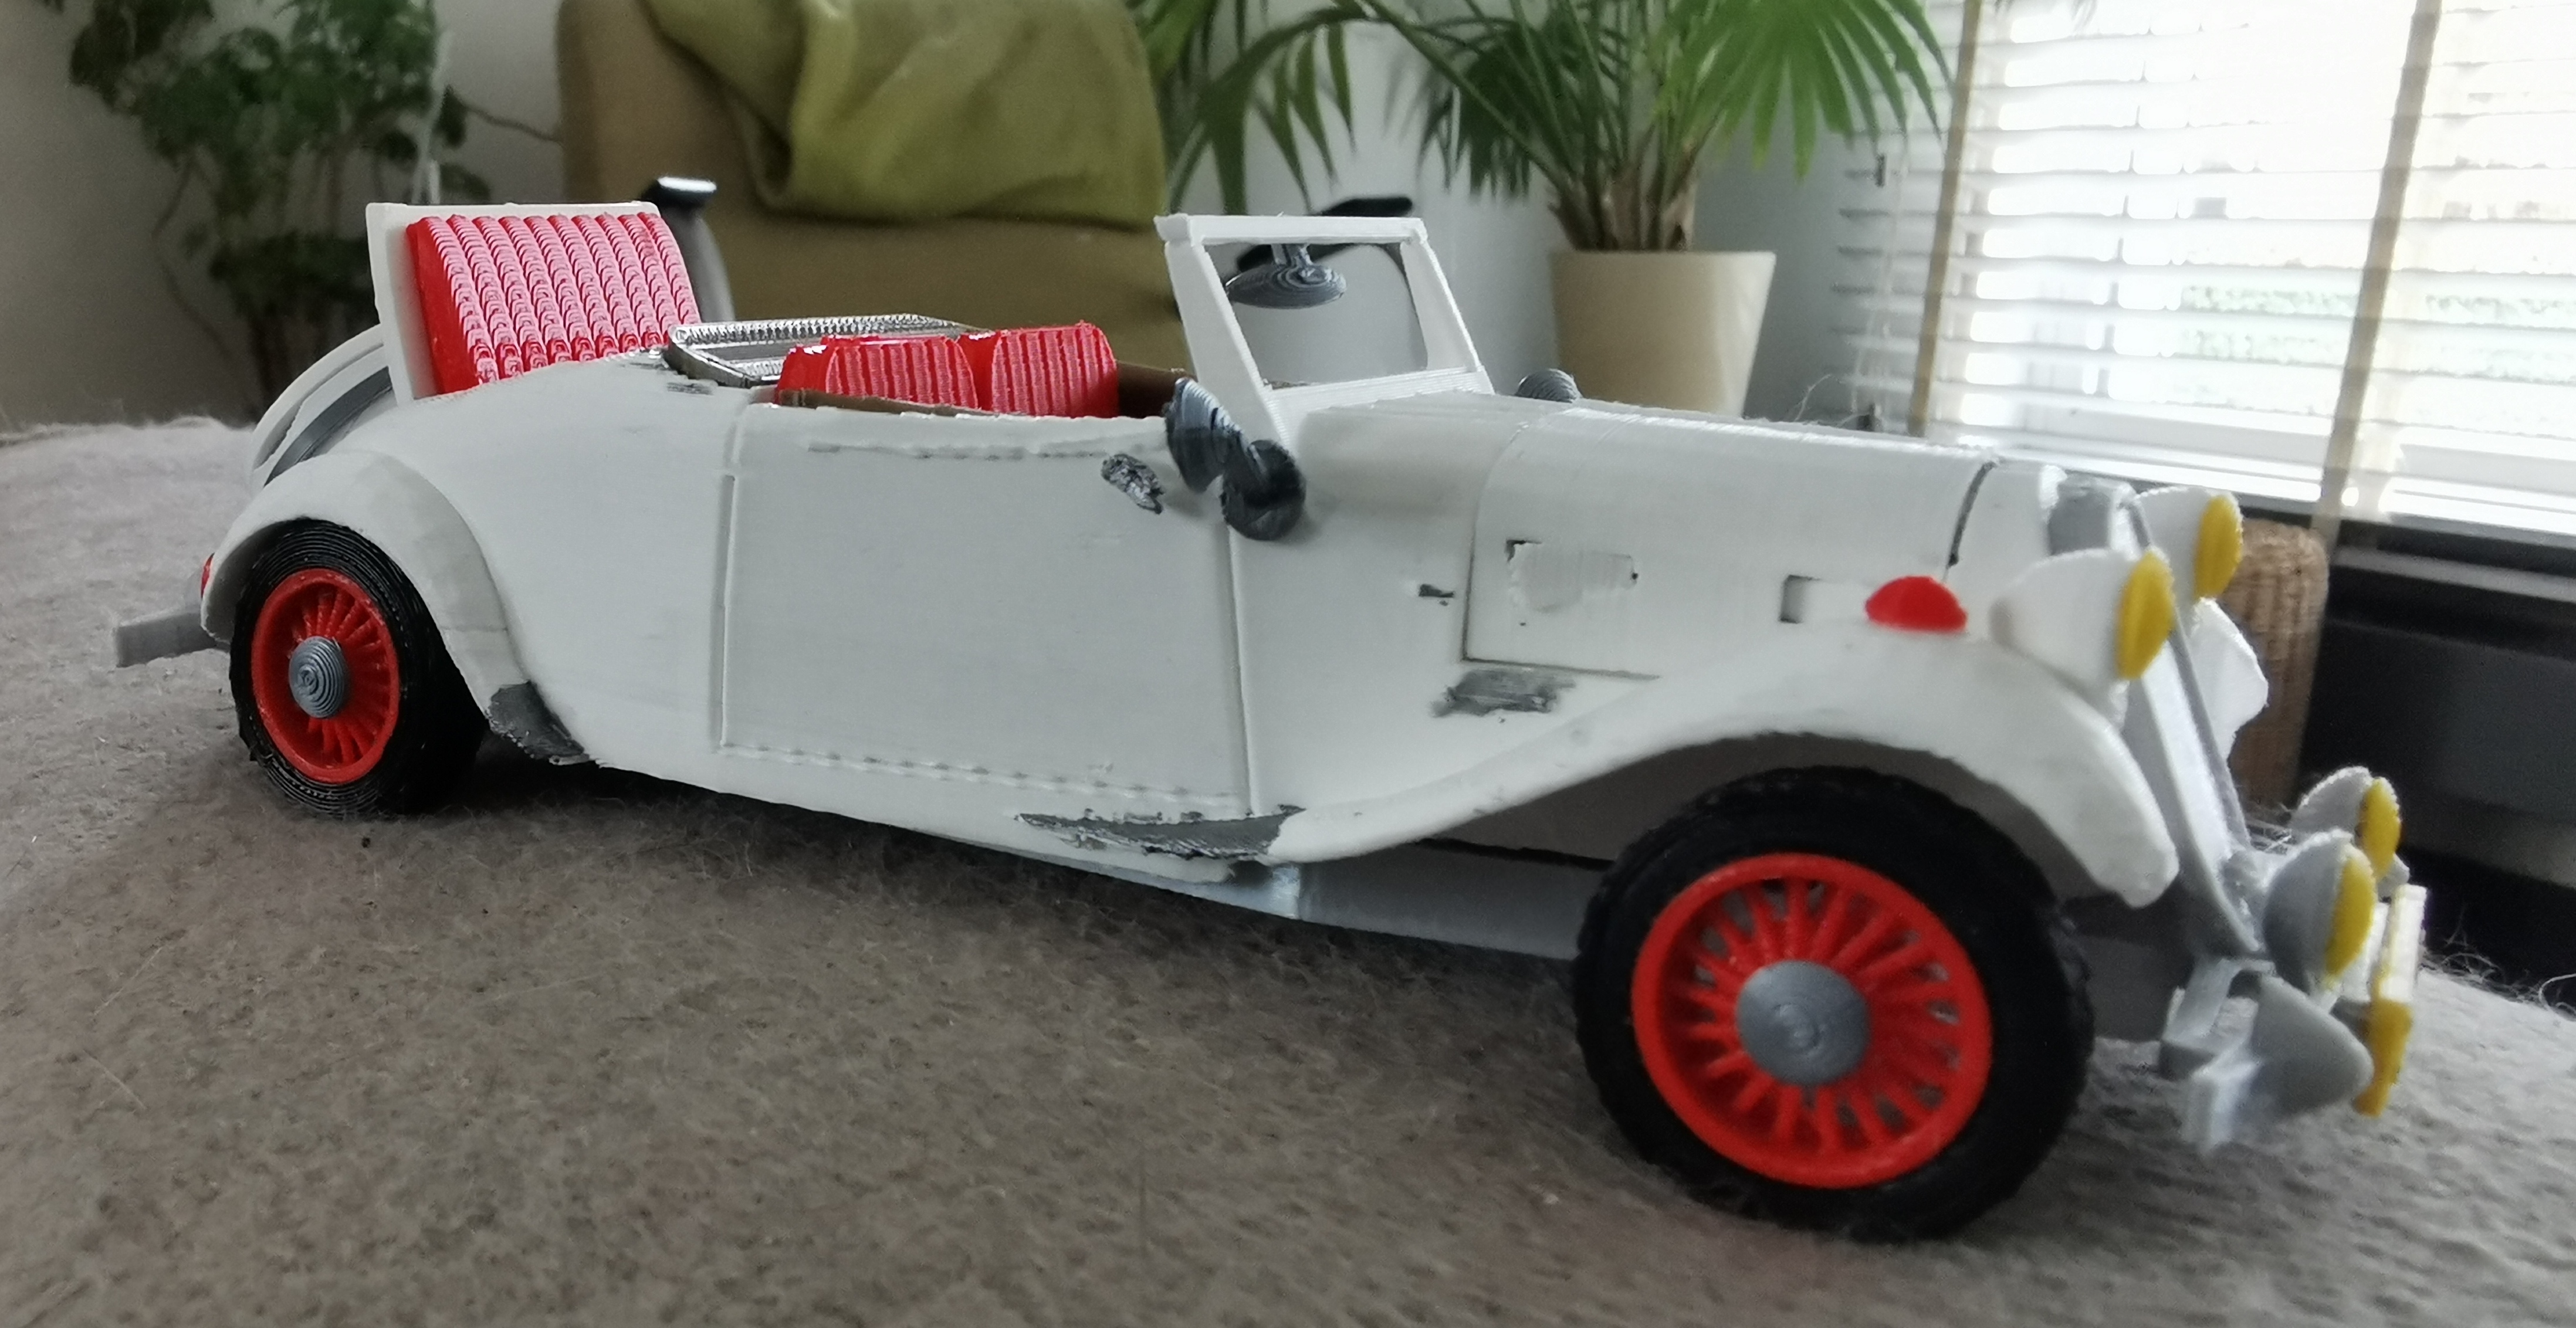 Upgrade! Citroen Atraction Cabriolet 2.0 Scale 1:25 year 1951 designed by Ed-sept7.